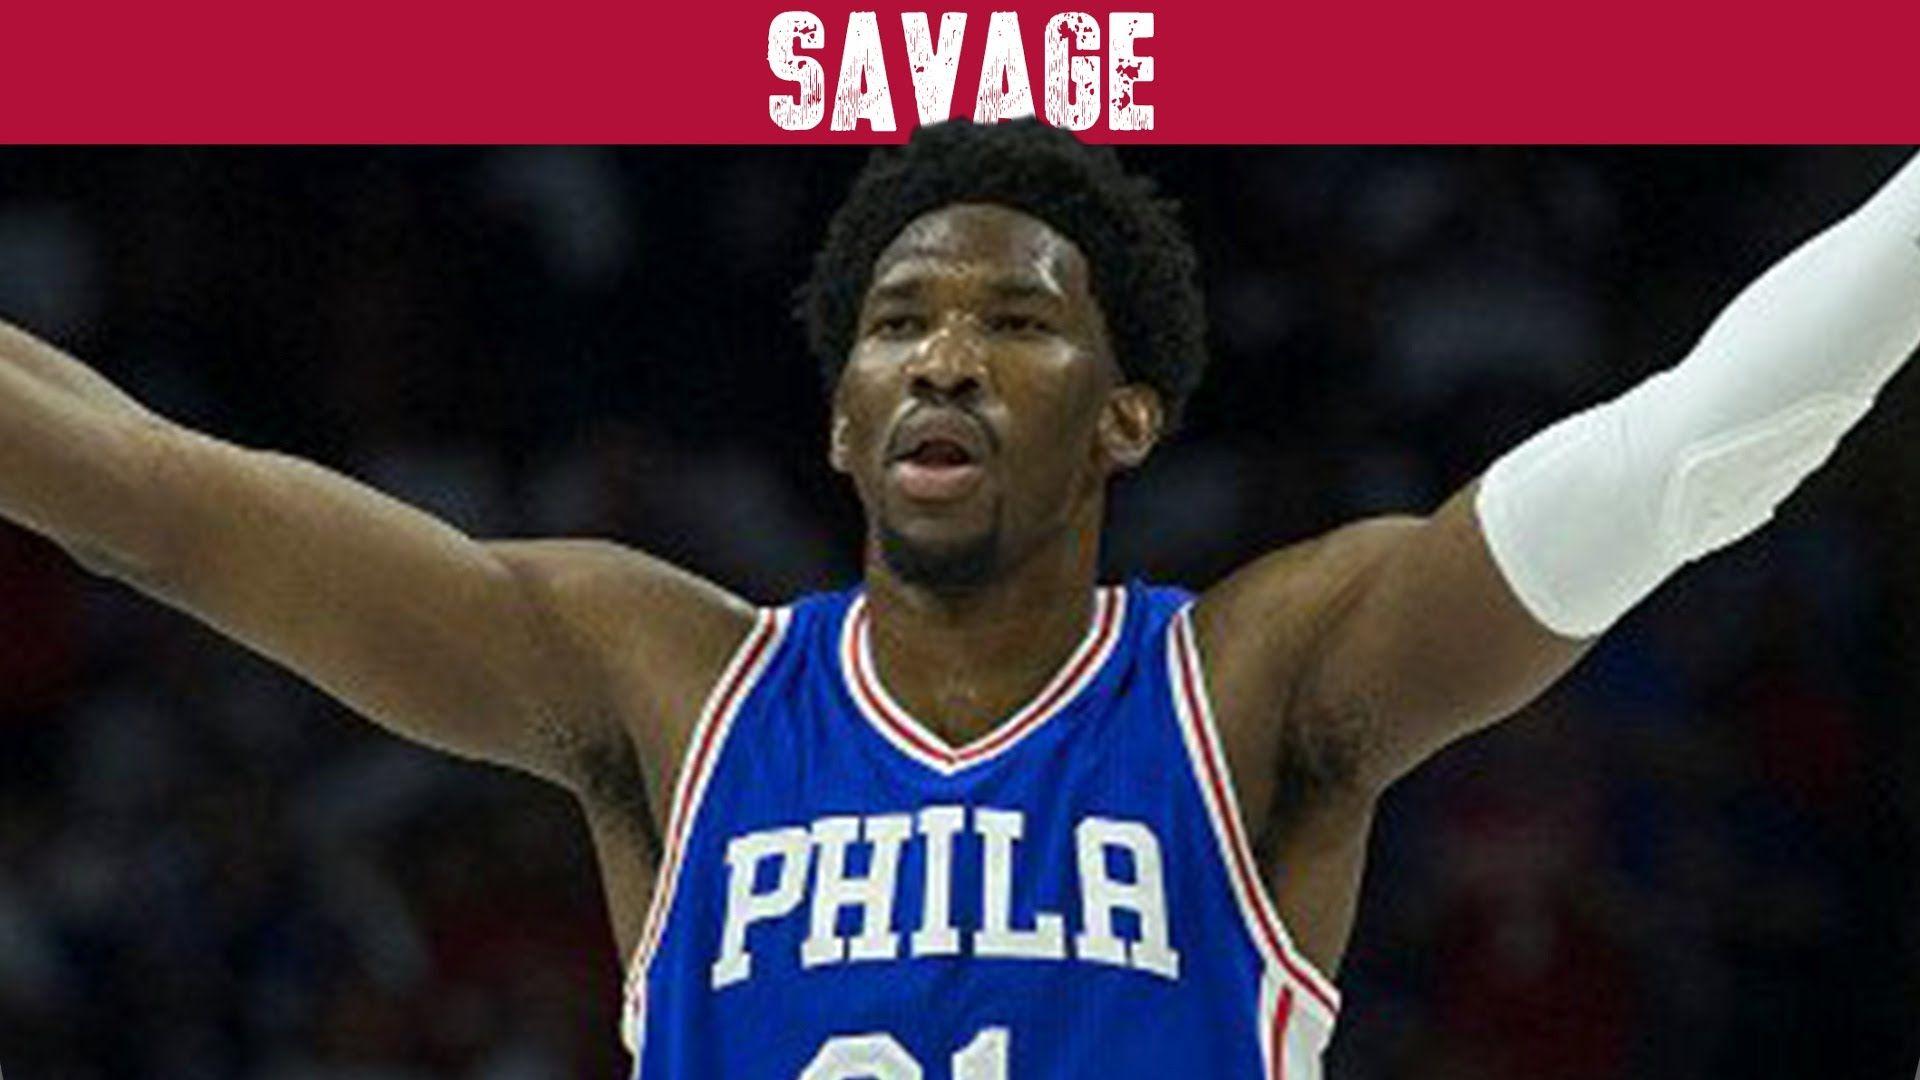 Embiid's Savage Moves. Joel Embiid threw down an absolutely